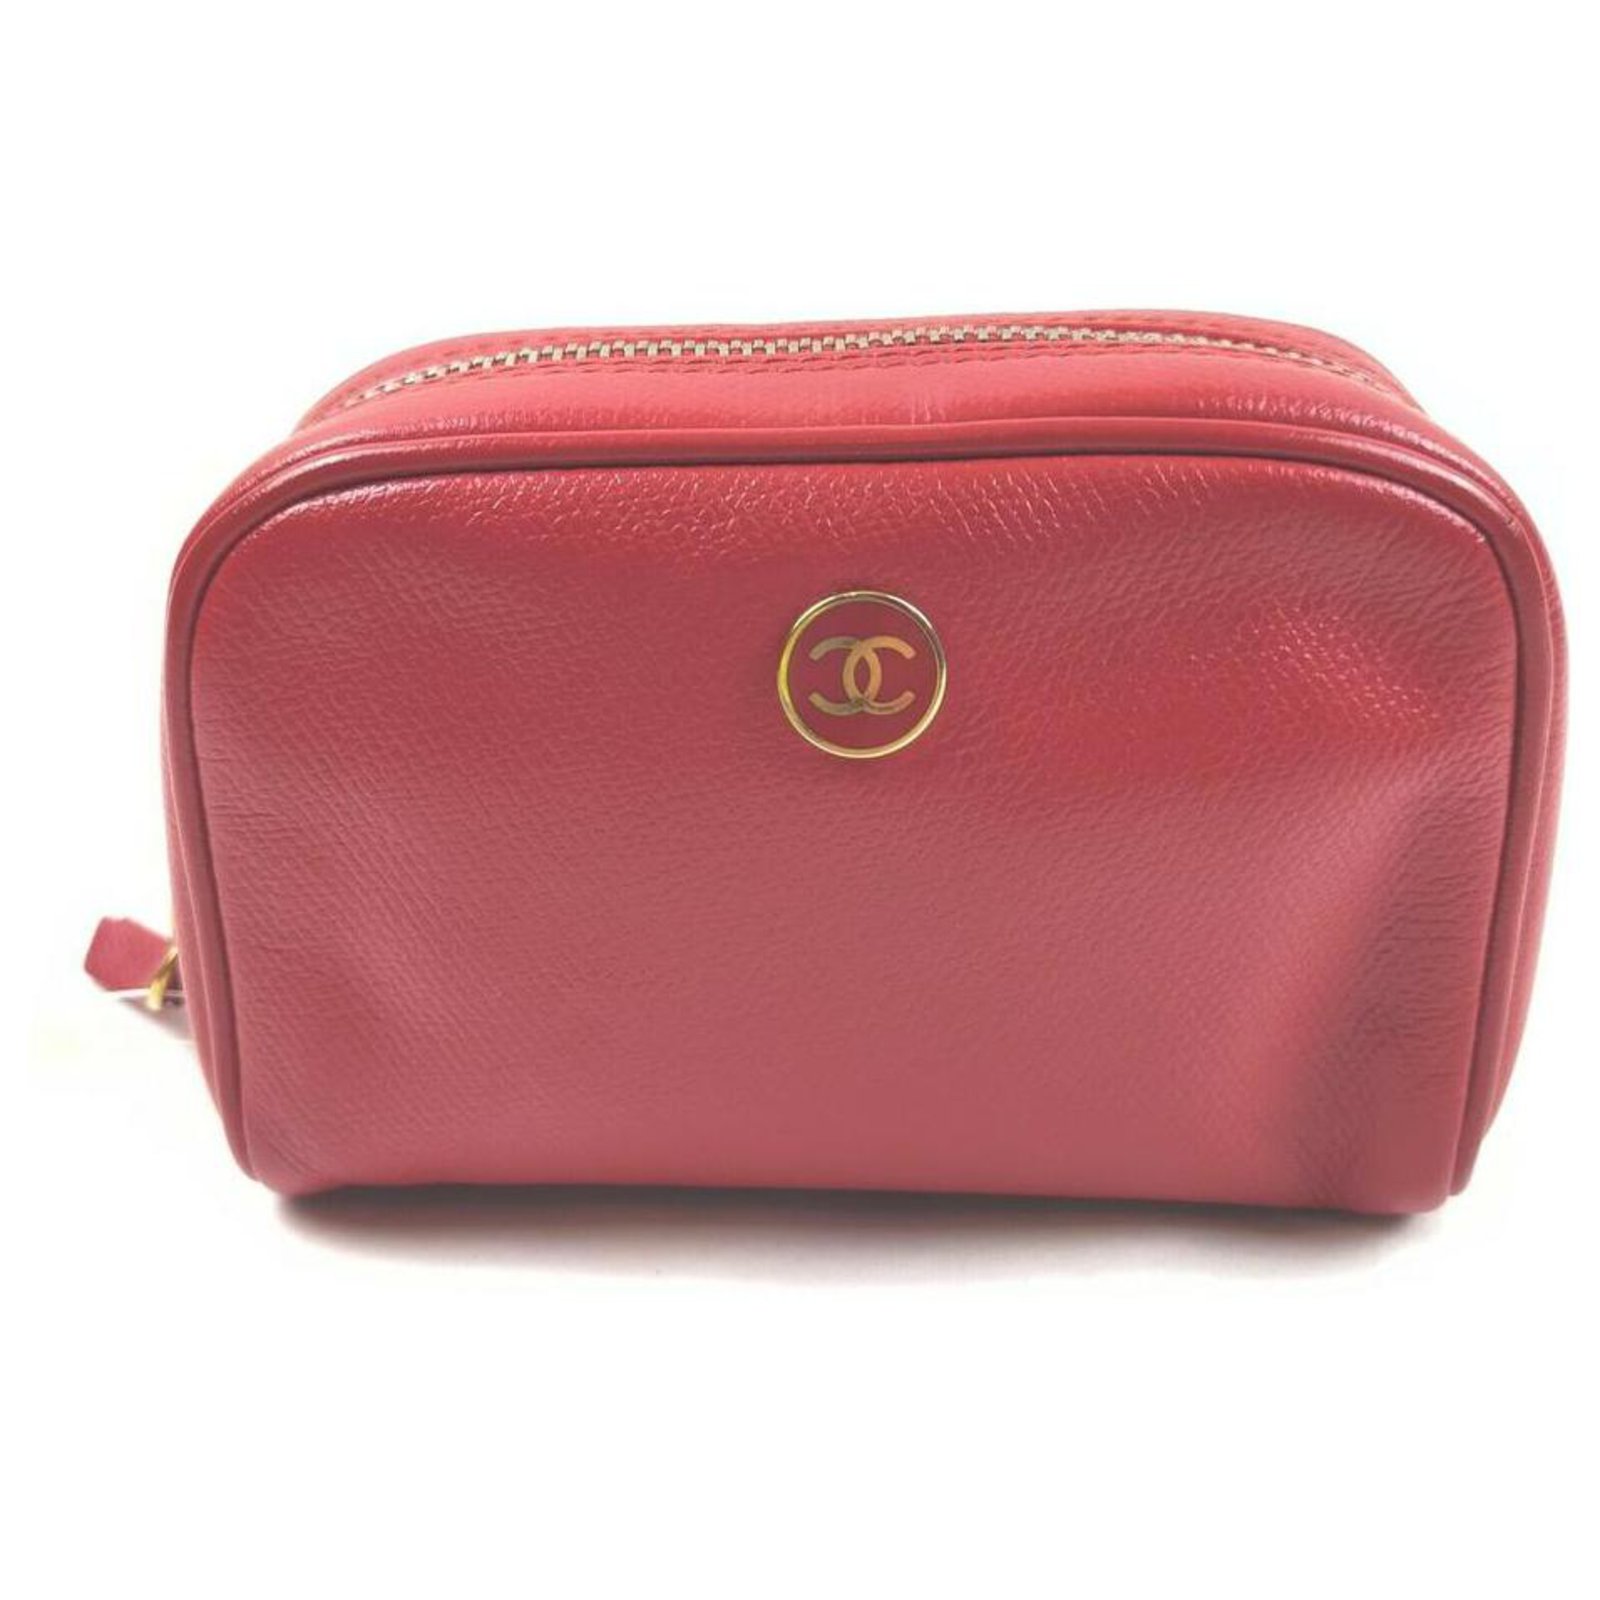 Chanel Red Leather Button Line Cosmetic Case Make Up Pouch ref